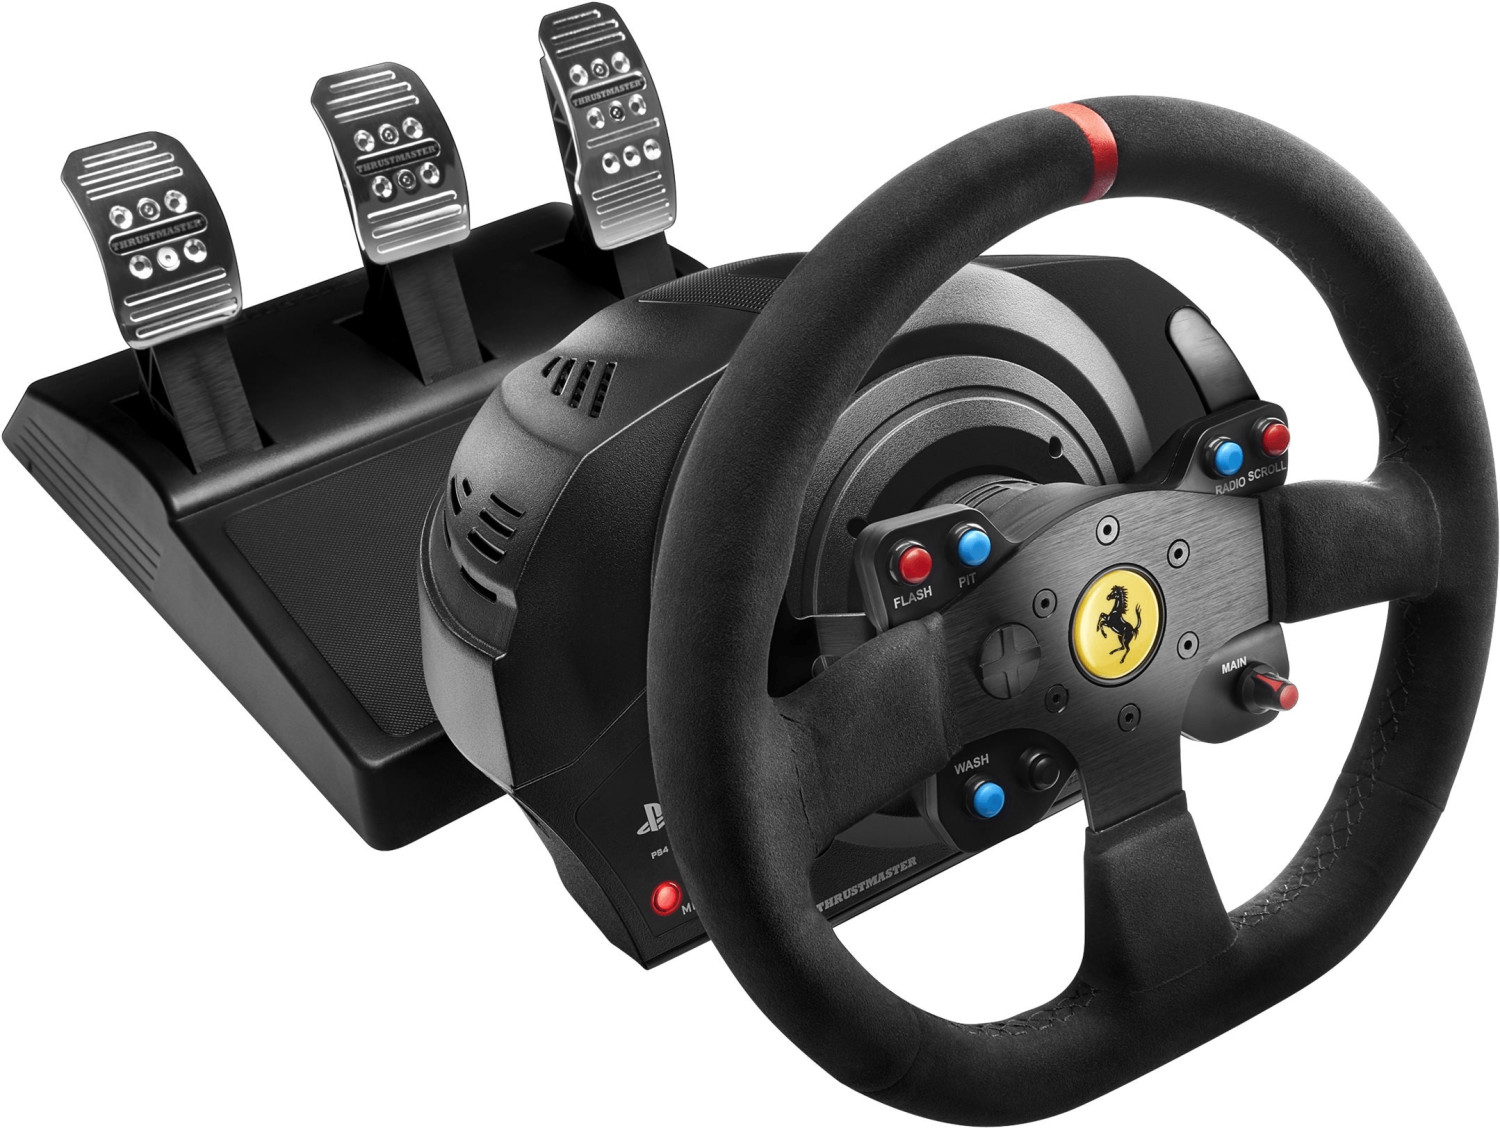 Thrustmaster Racing Clamp für Lenkrad-Add-ons (PC/PS4/PS3/XBOX ONE)